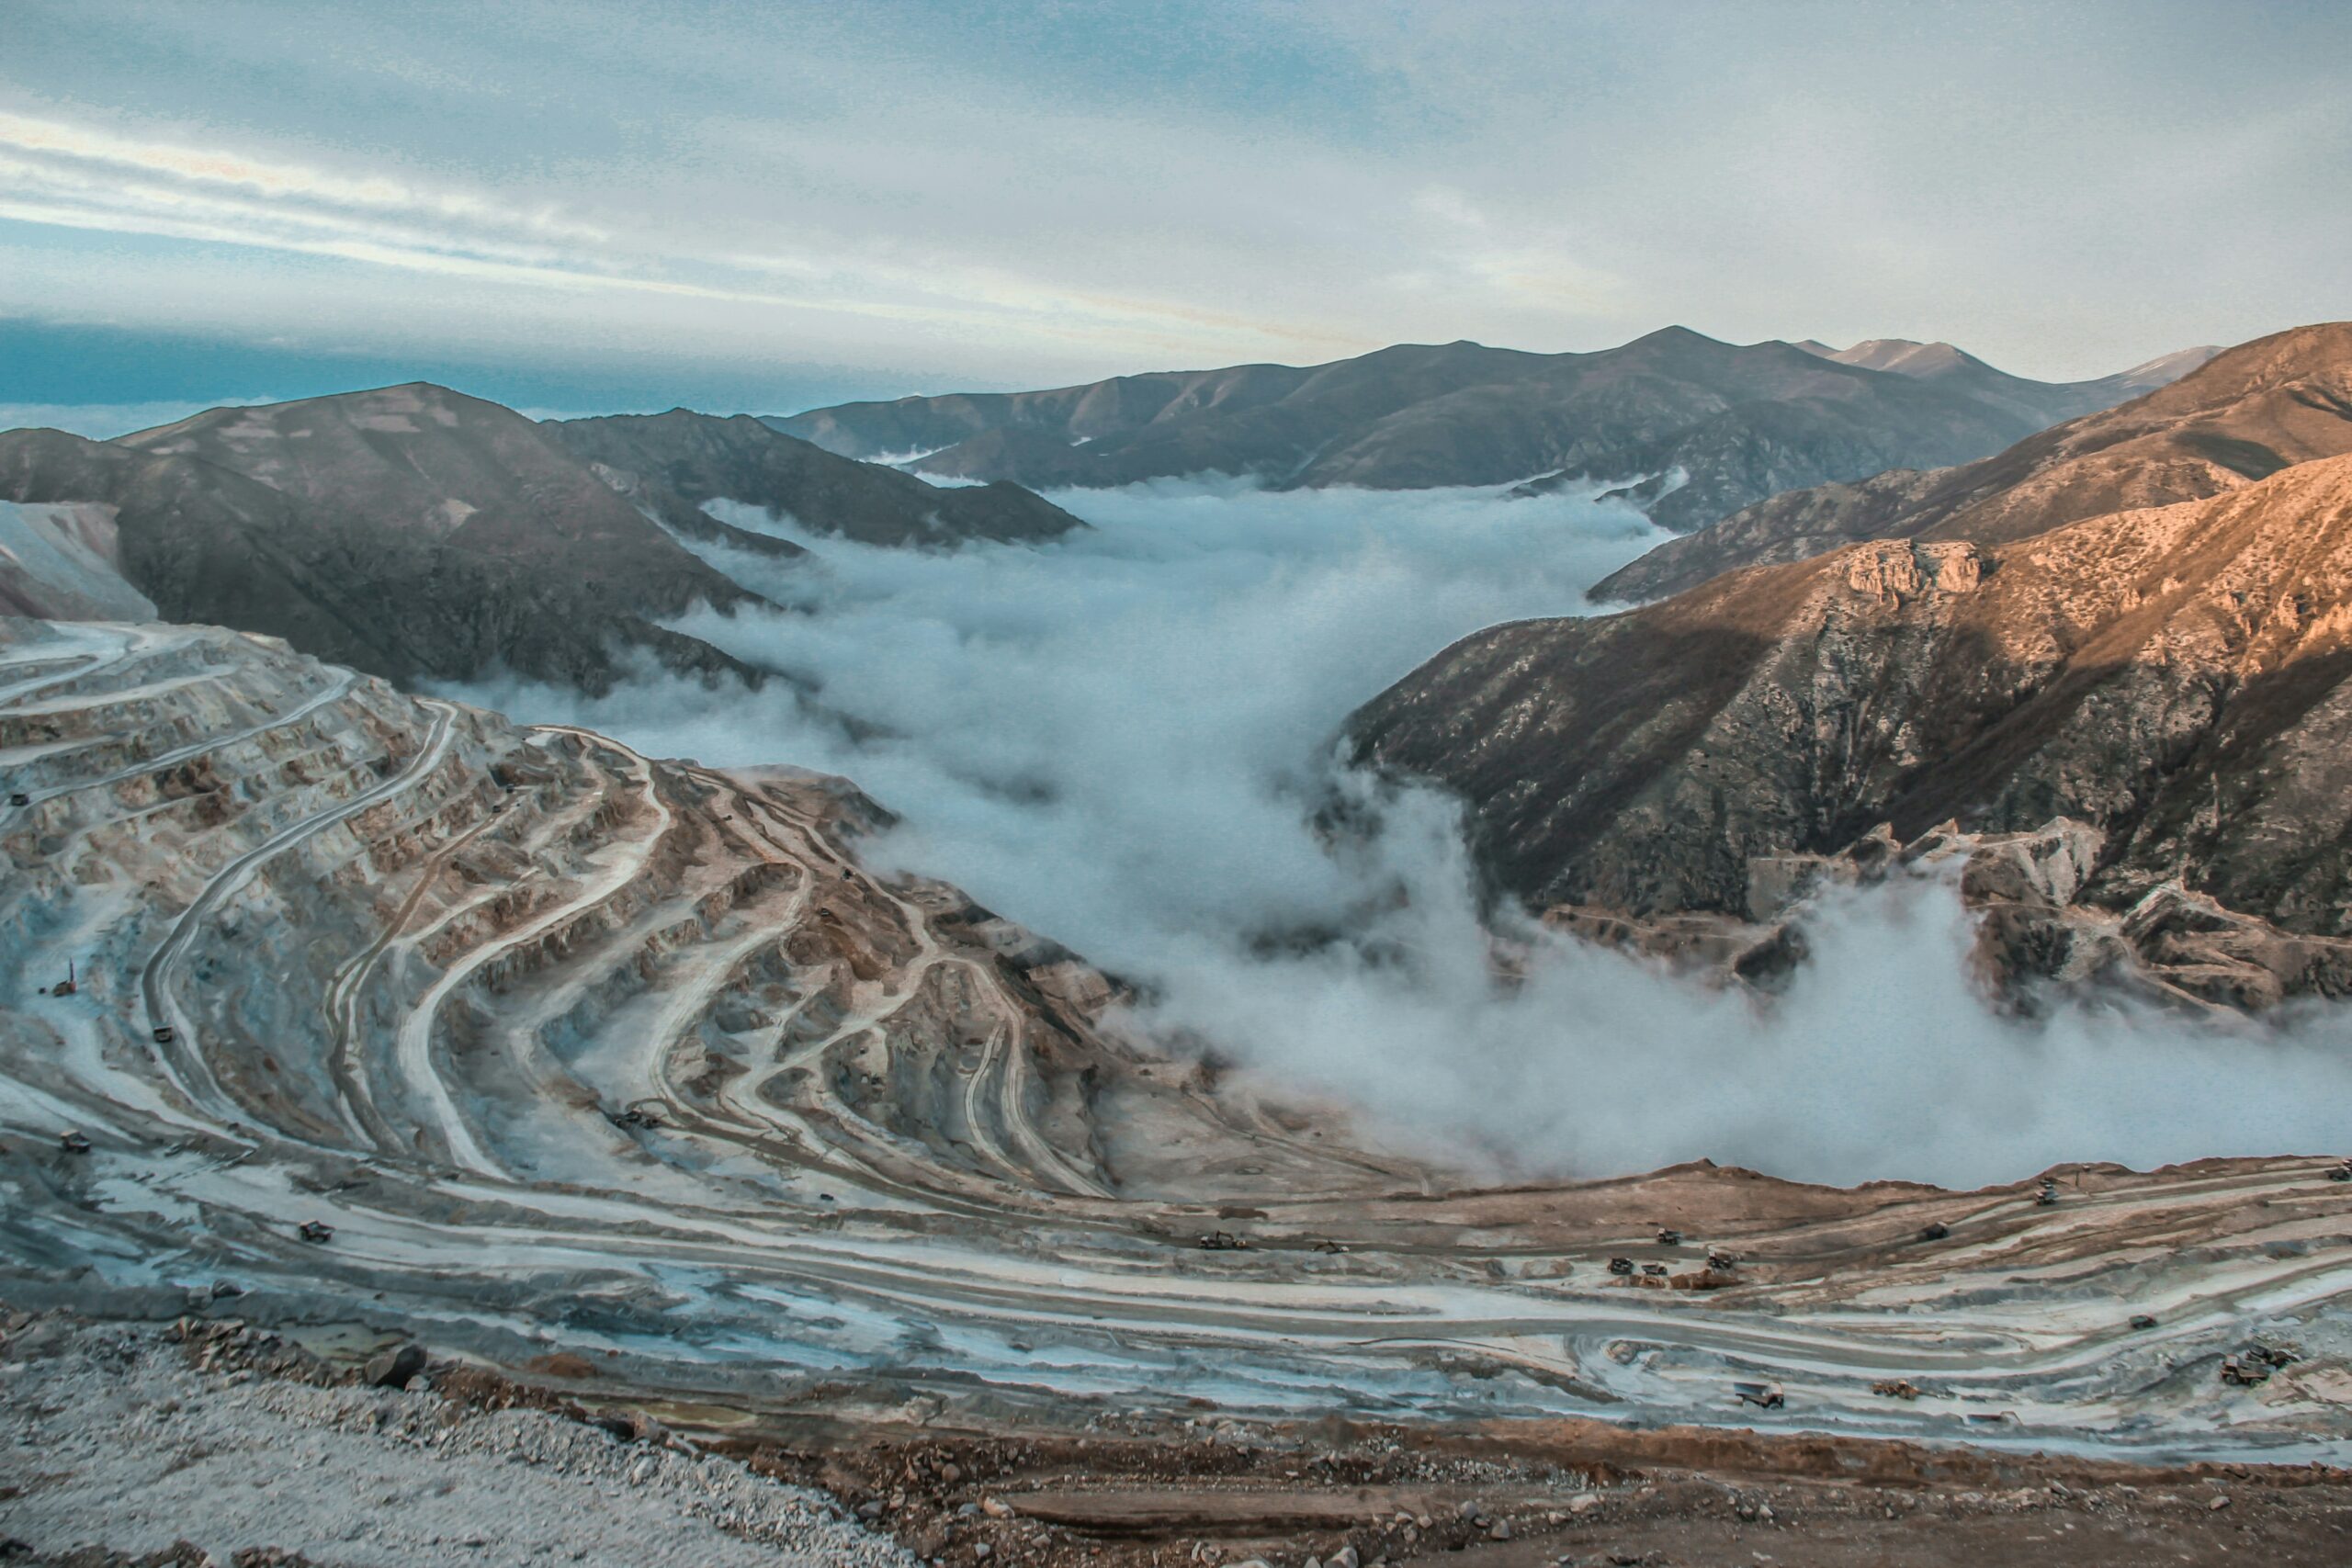 Low hanging cloud over a gold mine